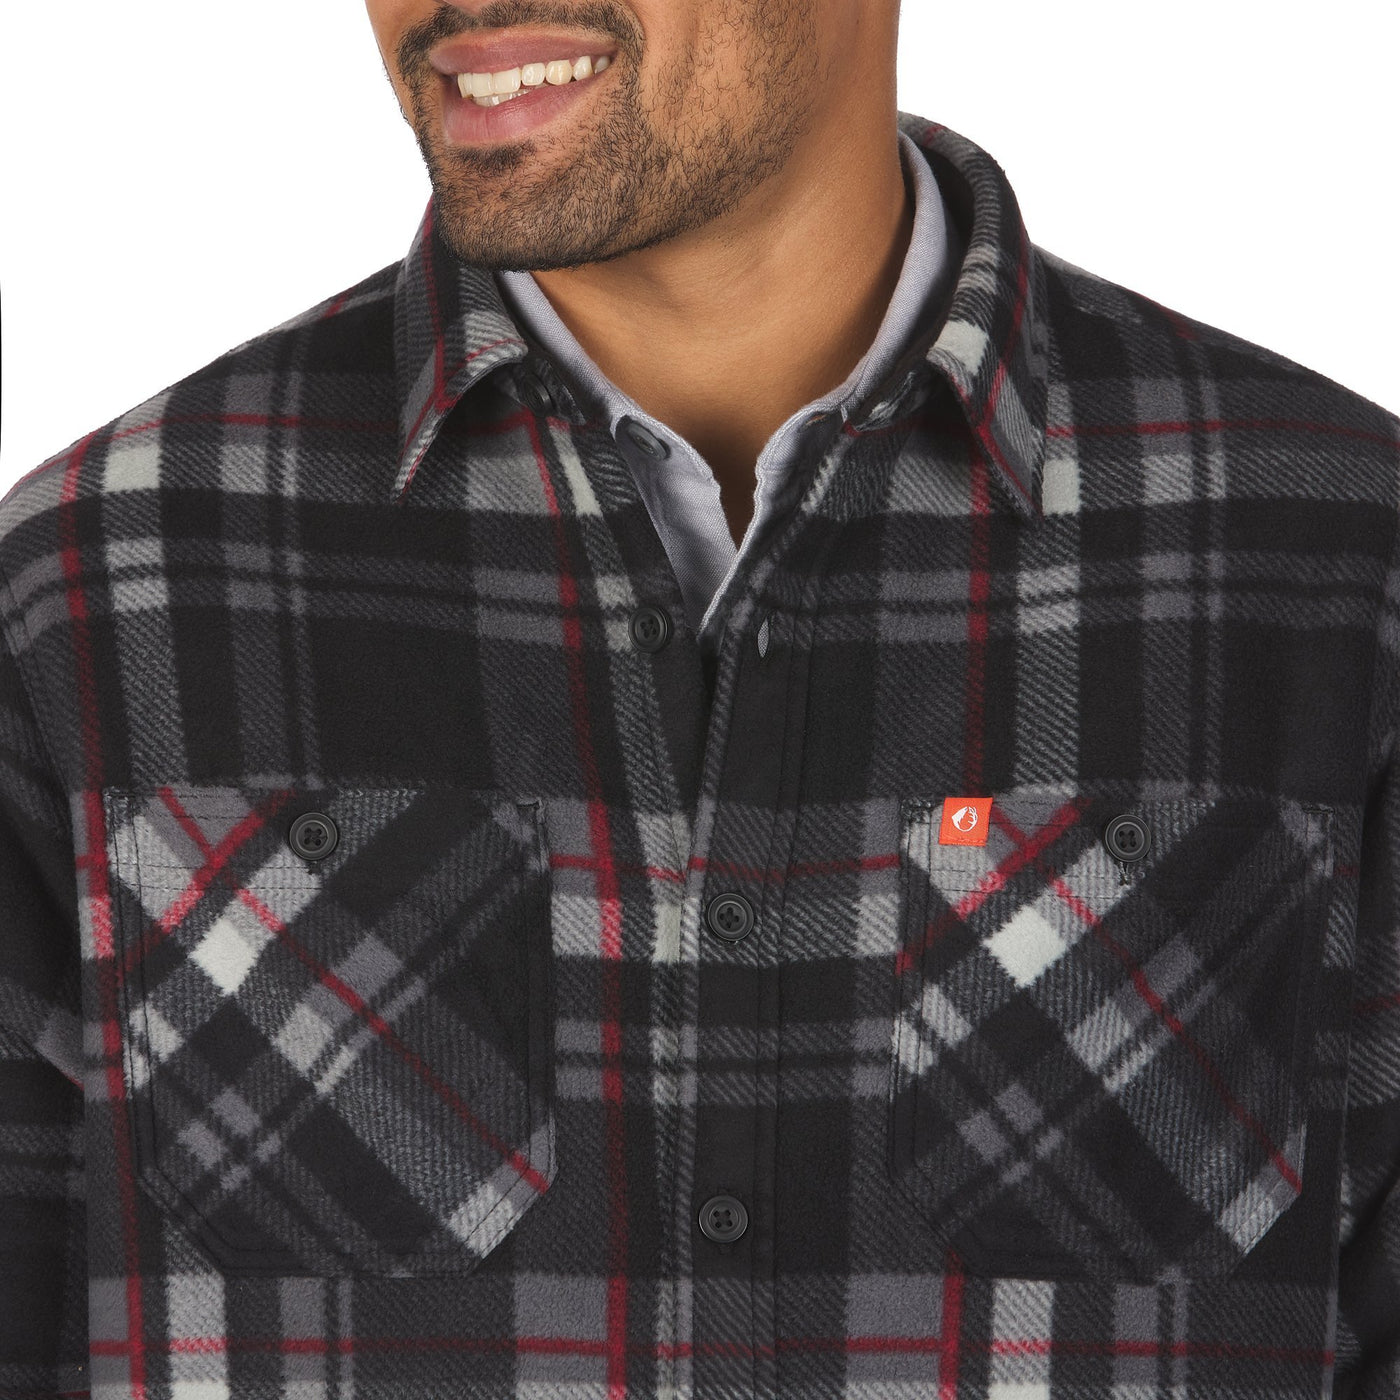 The American Outdoorsman Men's Bonded Polar Fleece Lined Plaid Flannel Shirt Jacket, Perfect for The Outdoors (Black/Grey, Large)